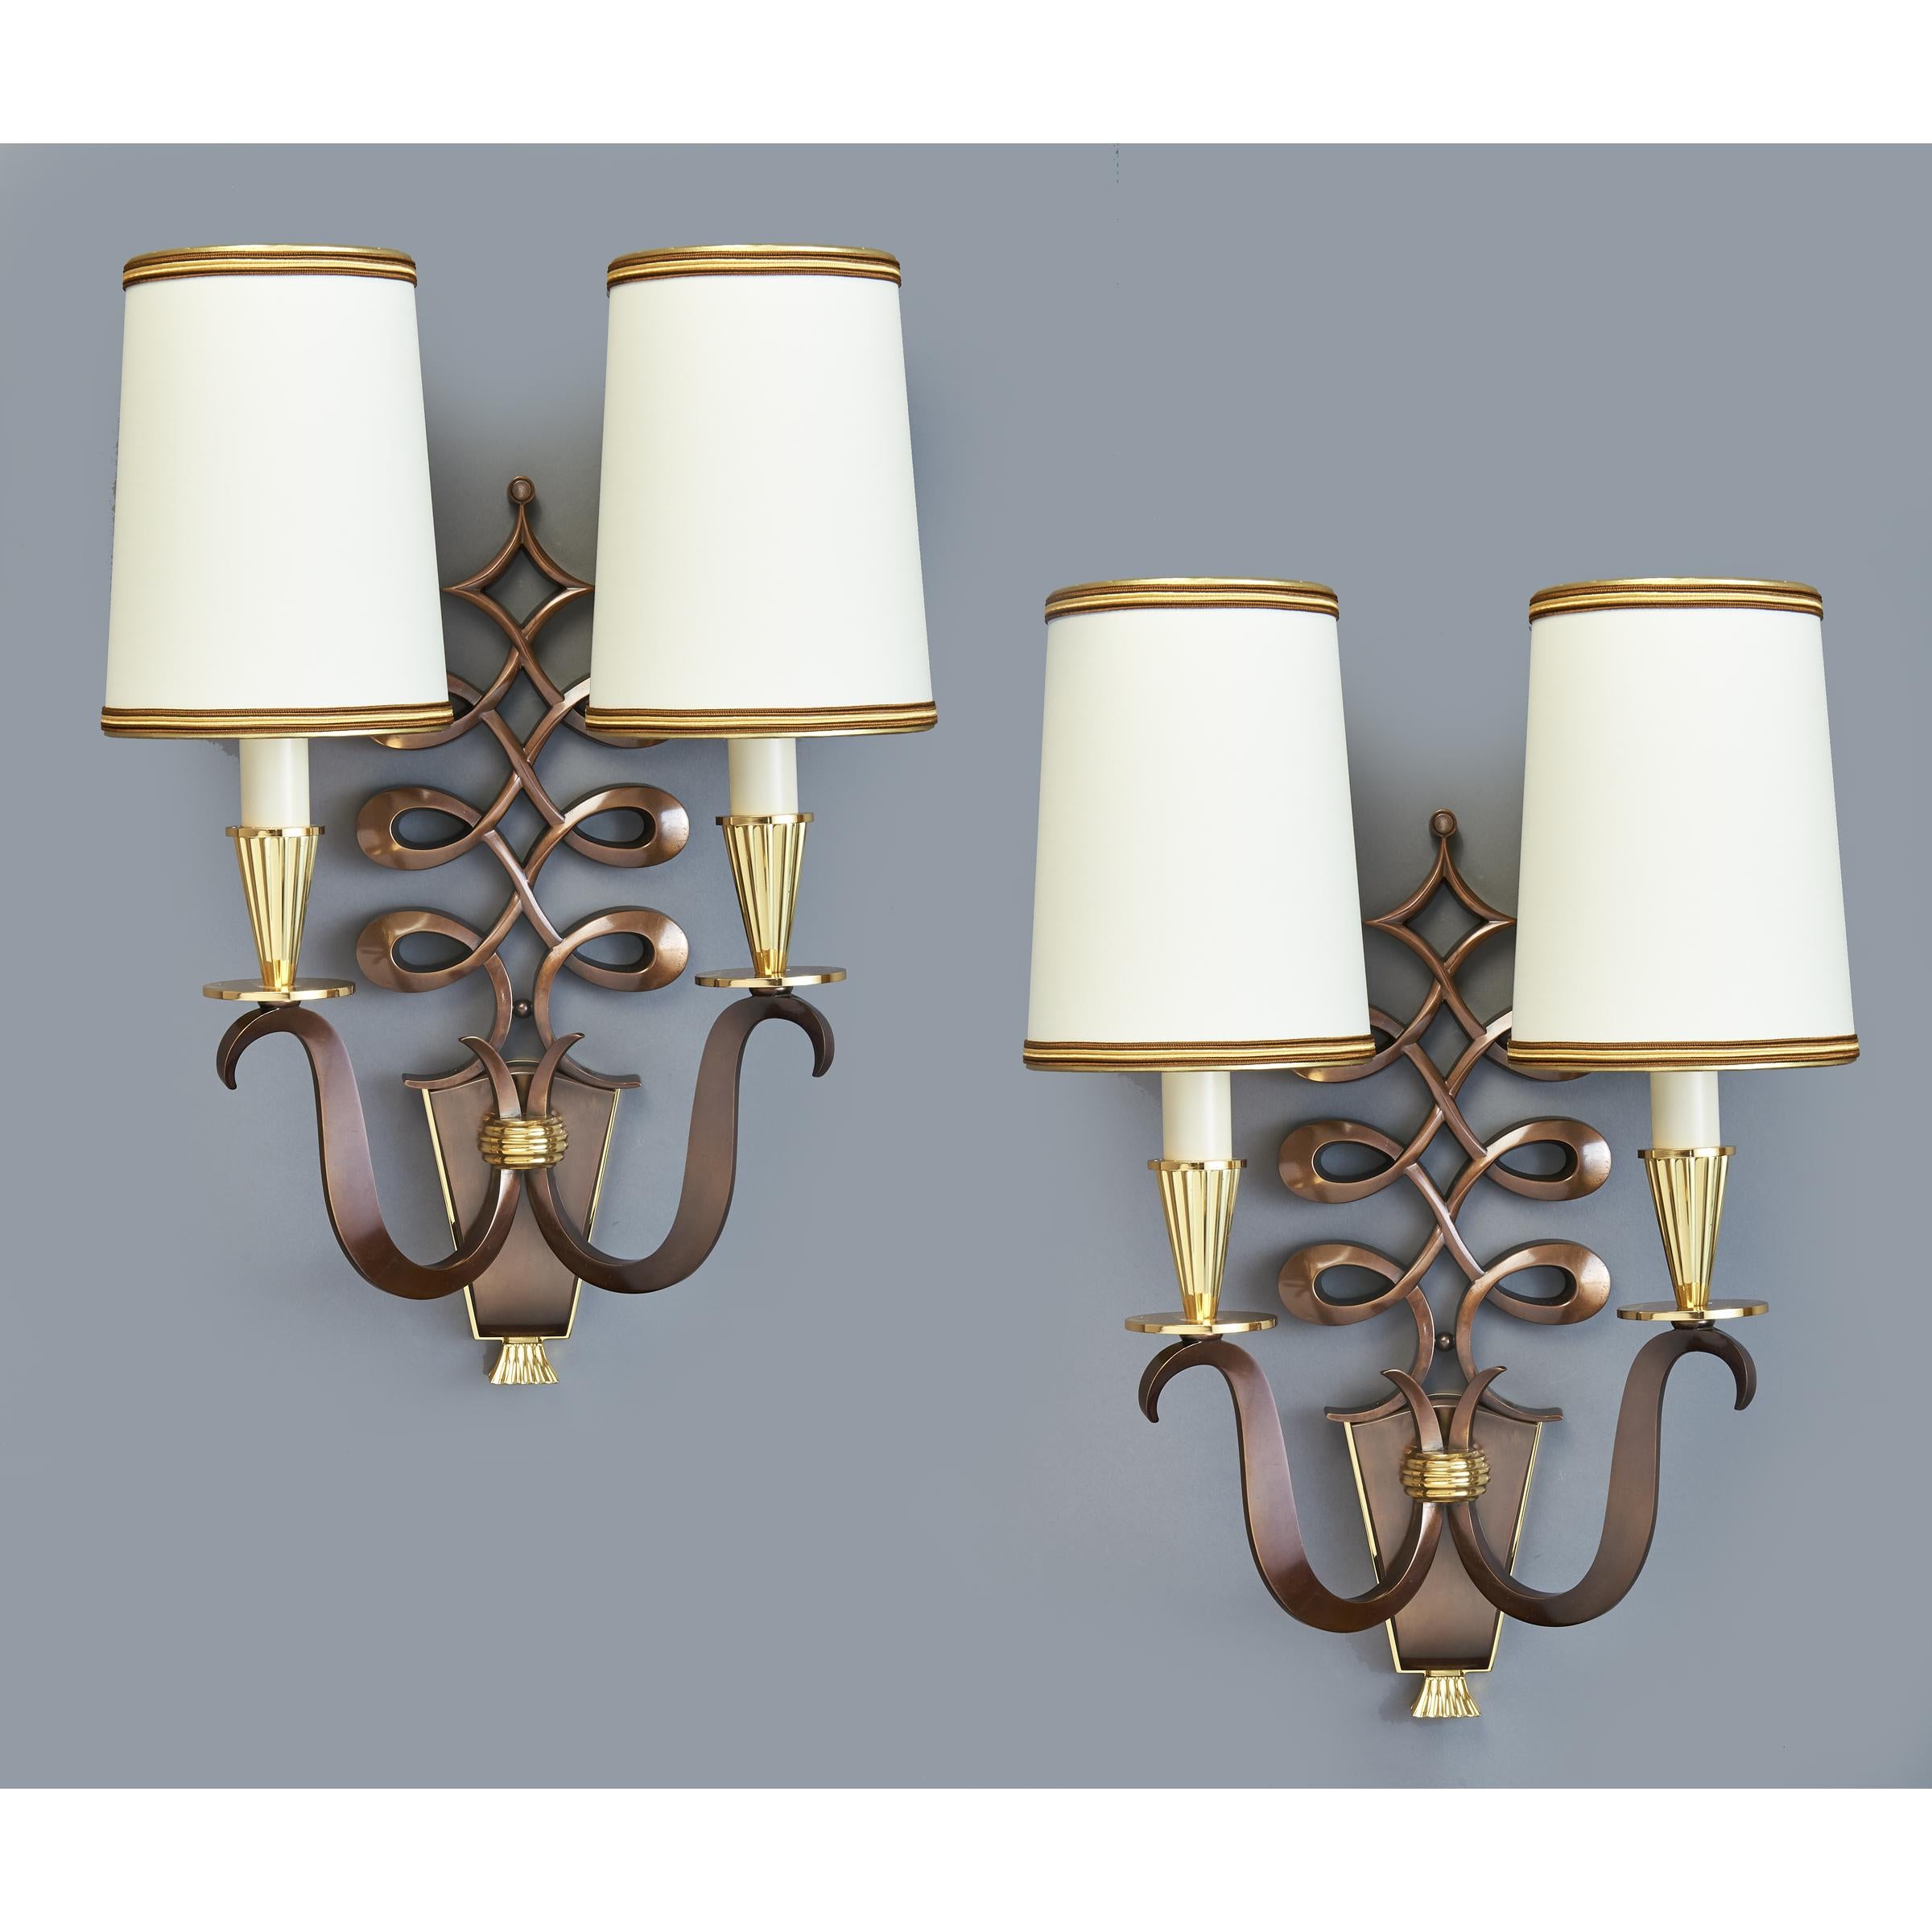 Mid-20th Century Important Pair of Genet & Michon Bronze Sconces, France, 1950s For Sale